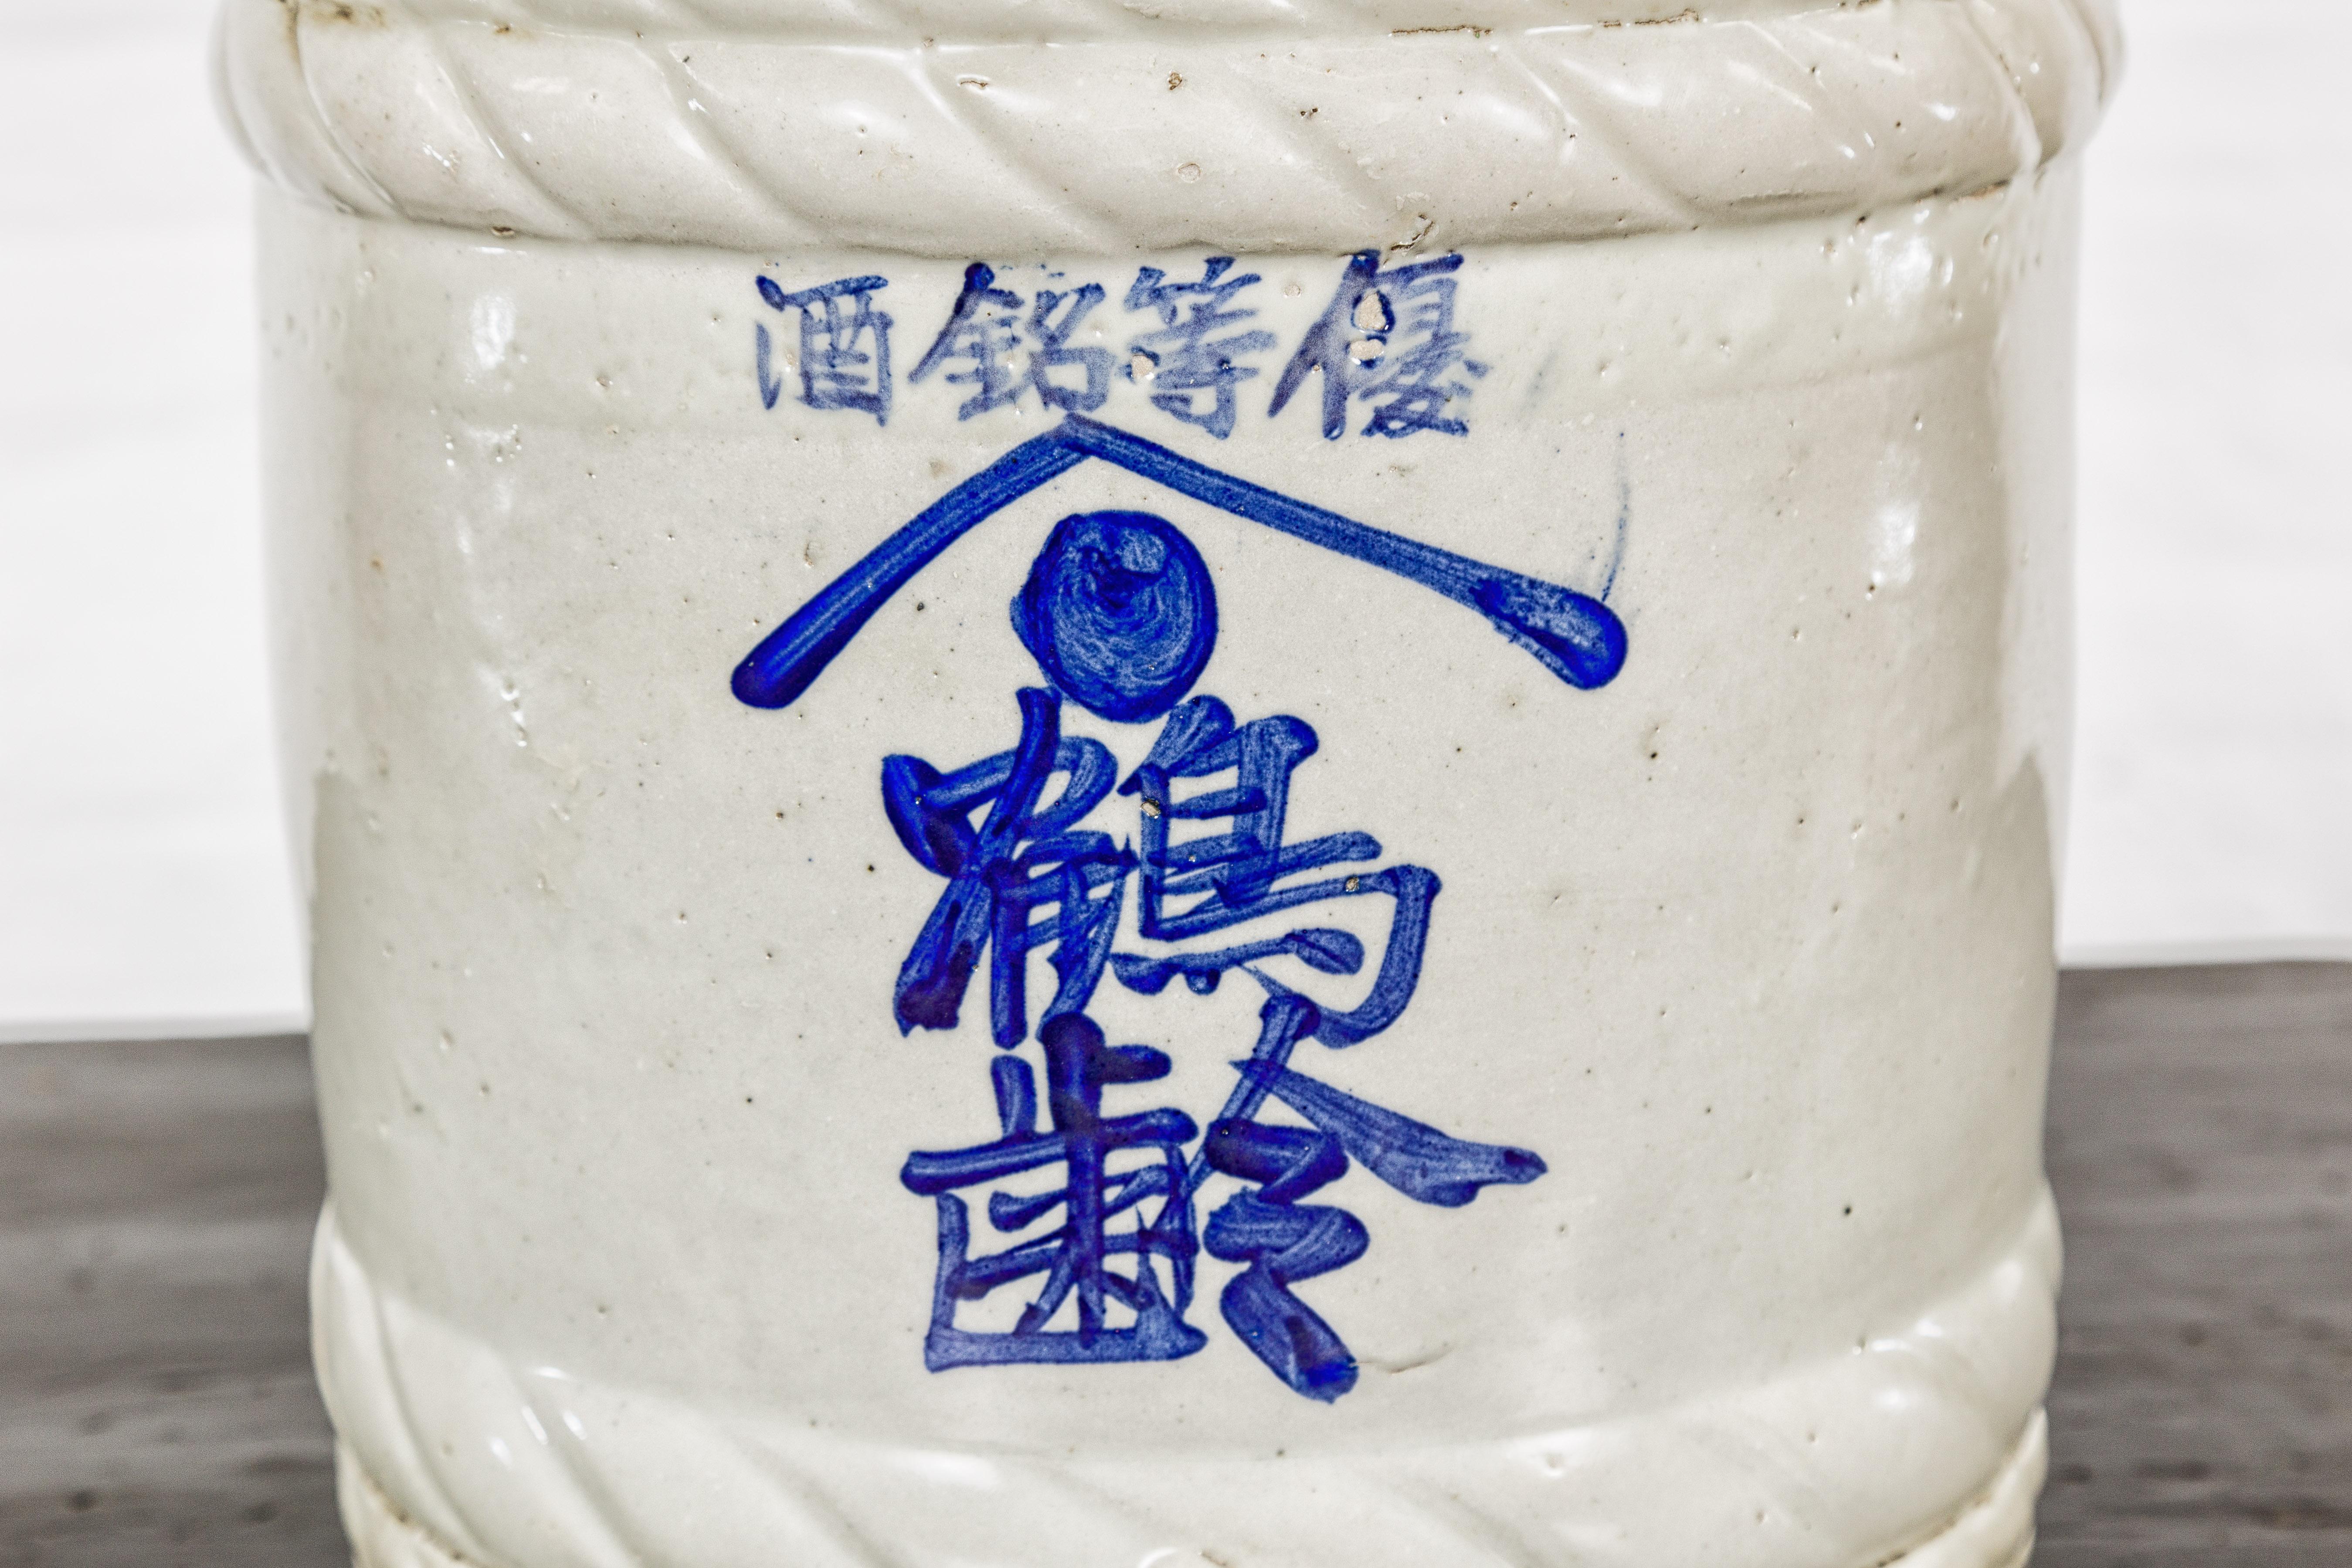 Japanese Meiji Period 19th Century Barrel Shaped Sake Jar with Calligraphy For Sale 2